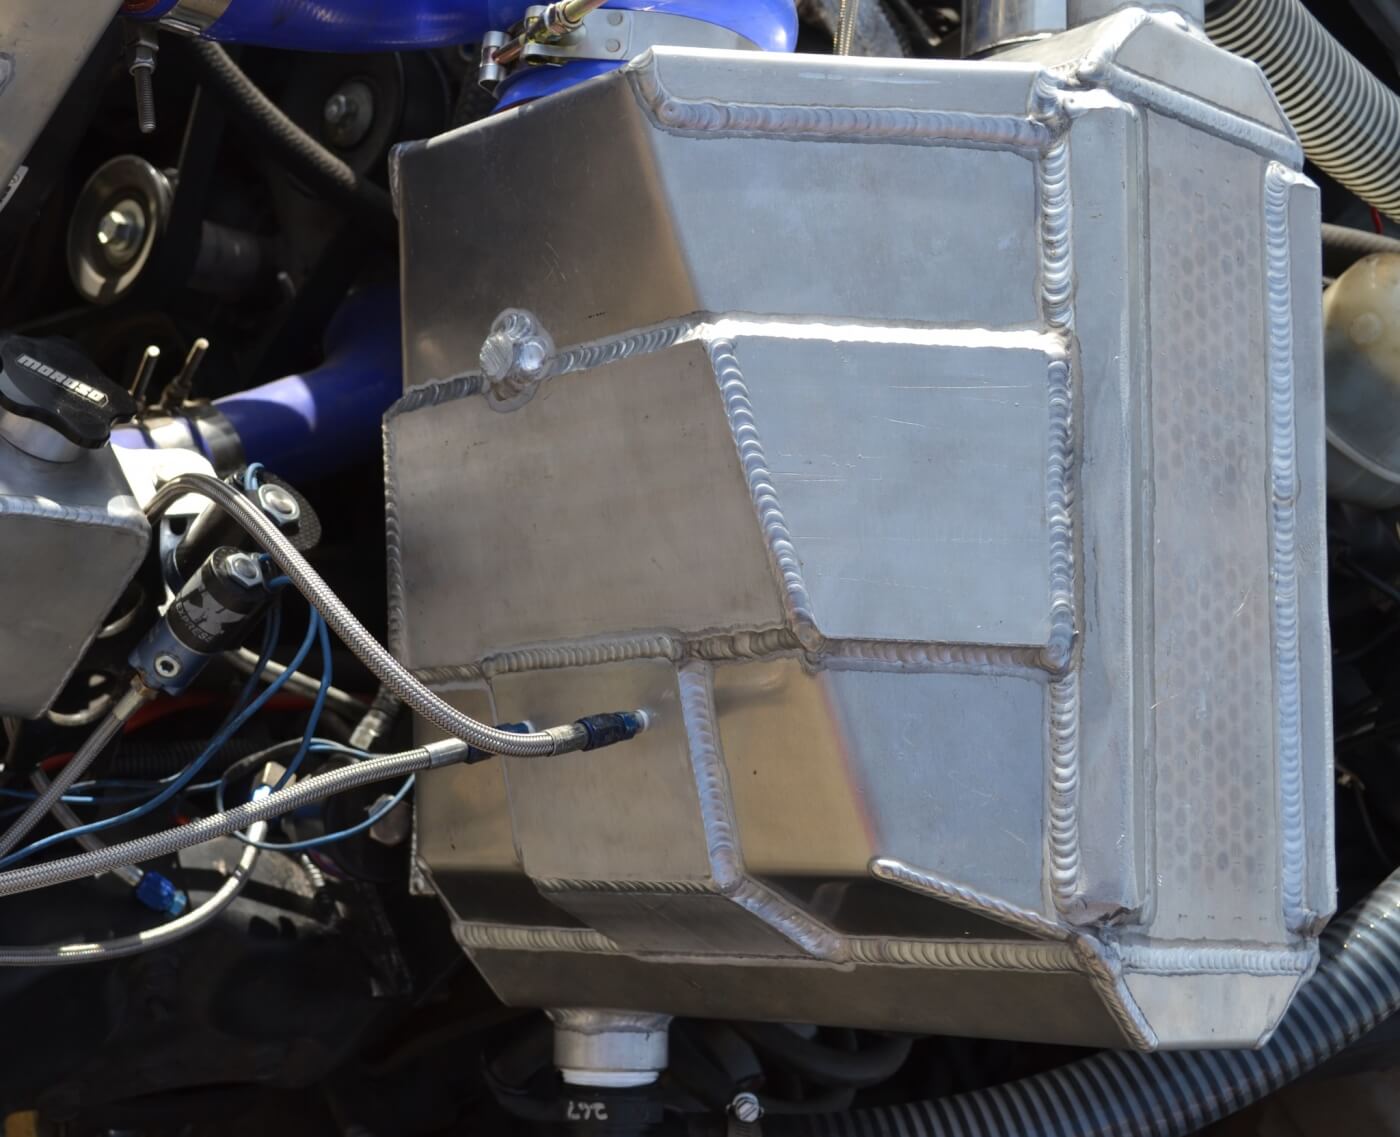 9. Another popular spot for injecting nitrous is into the intercooler, which not only adds horsepower, but also can really drop the charge air temperature dramatically.